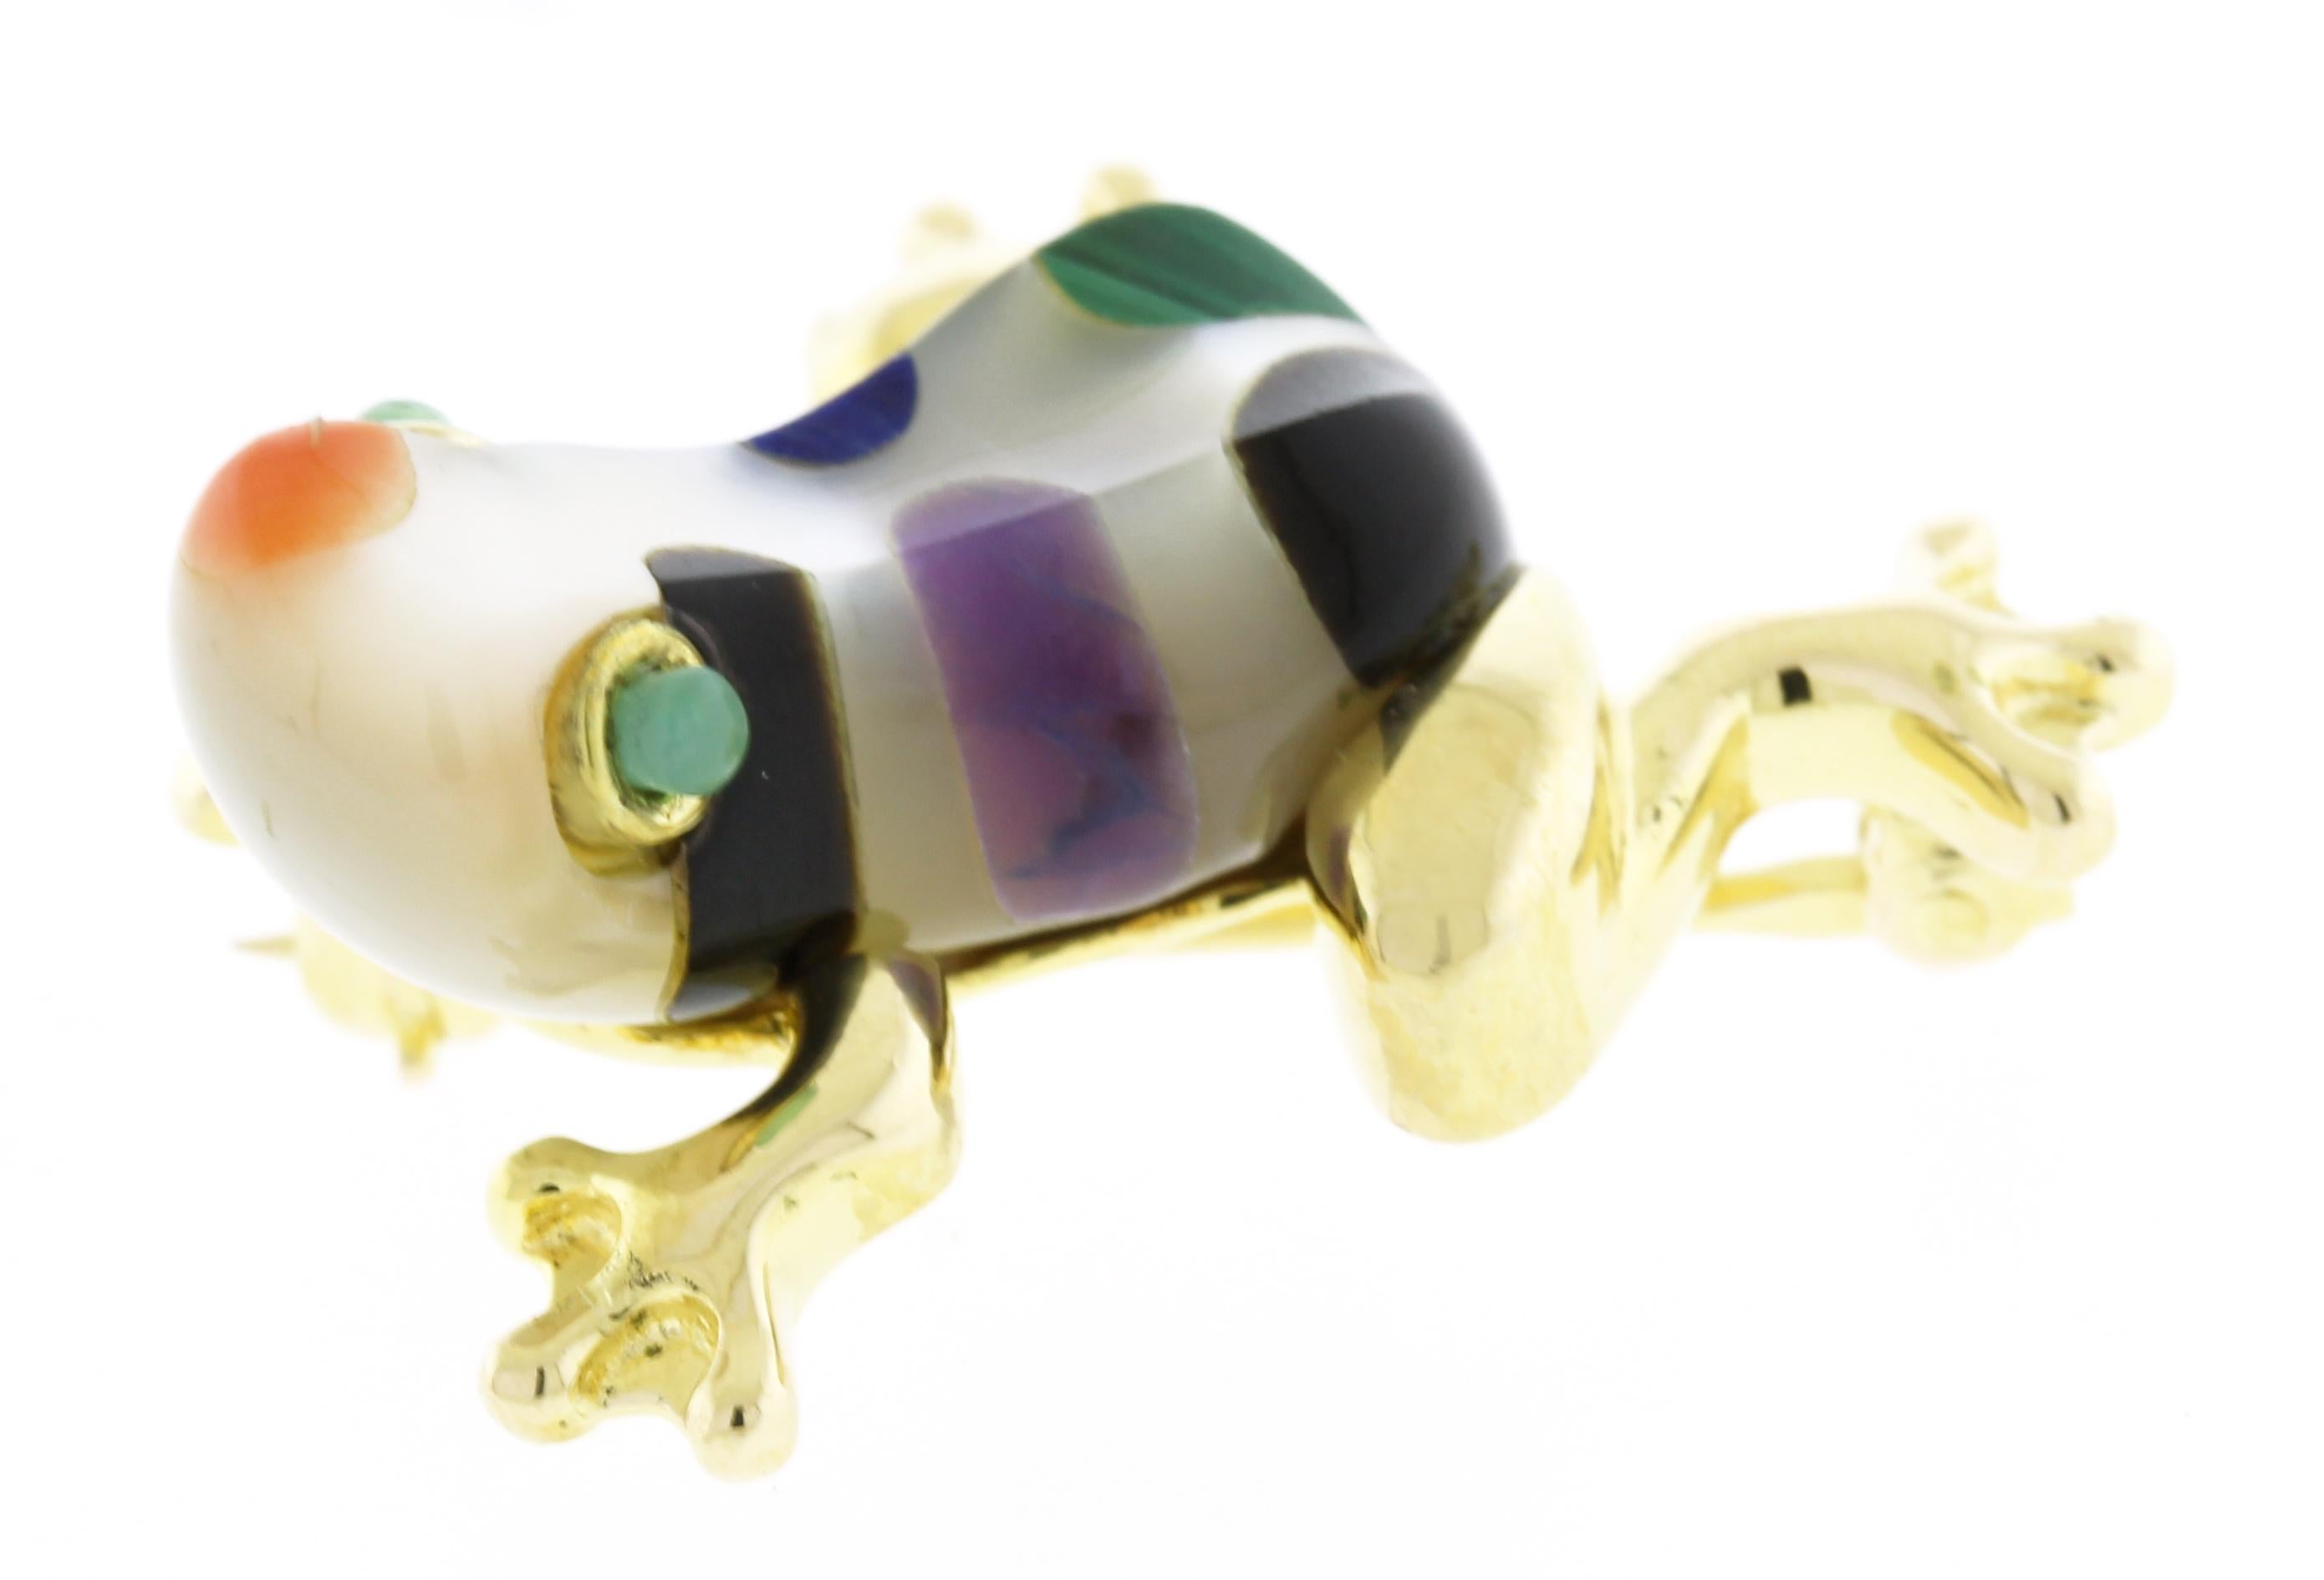 From Asch Grossbardt, this brooch is inlaid with different gemstones.
♦ Designer: Asch Grossbardt
♦ Metal: 14kt yellow gold
♦ Gemstone: Mother of pearl body with multi-gemstones
♦ Circa: 1980
♦ Length: 1 inch
♦ Width: 3/4 inches
♦ Packaging: